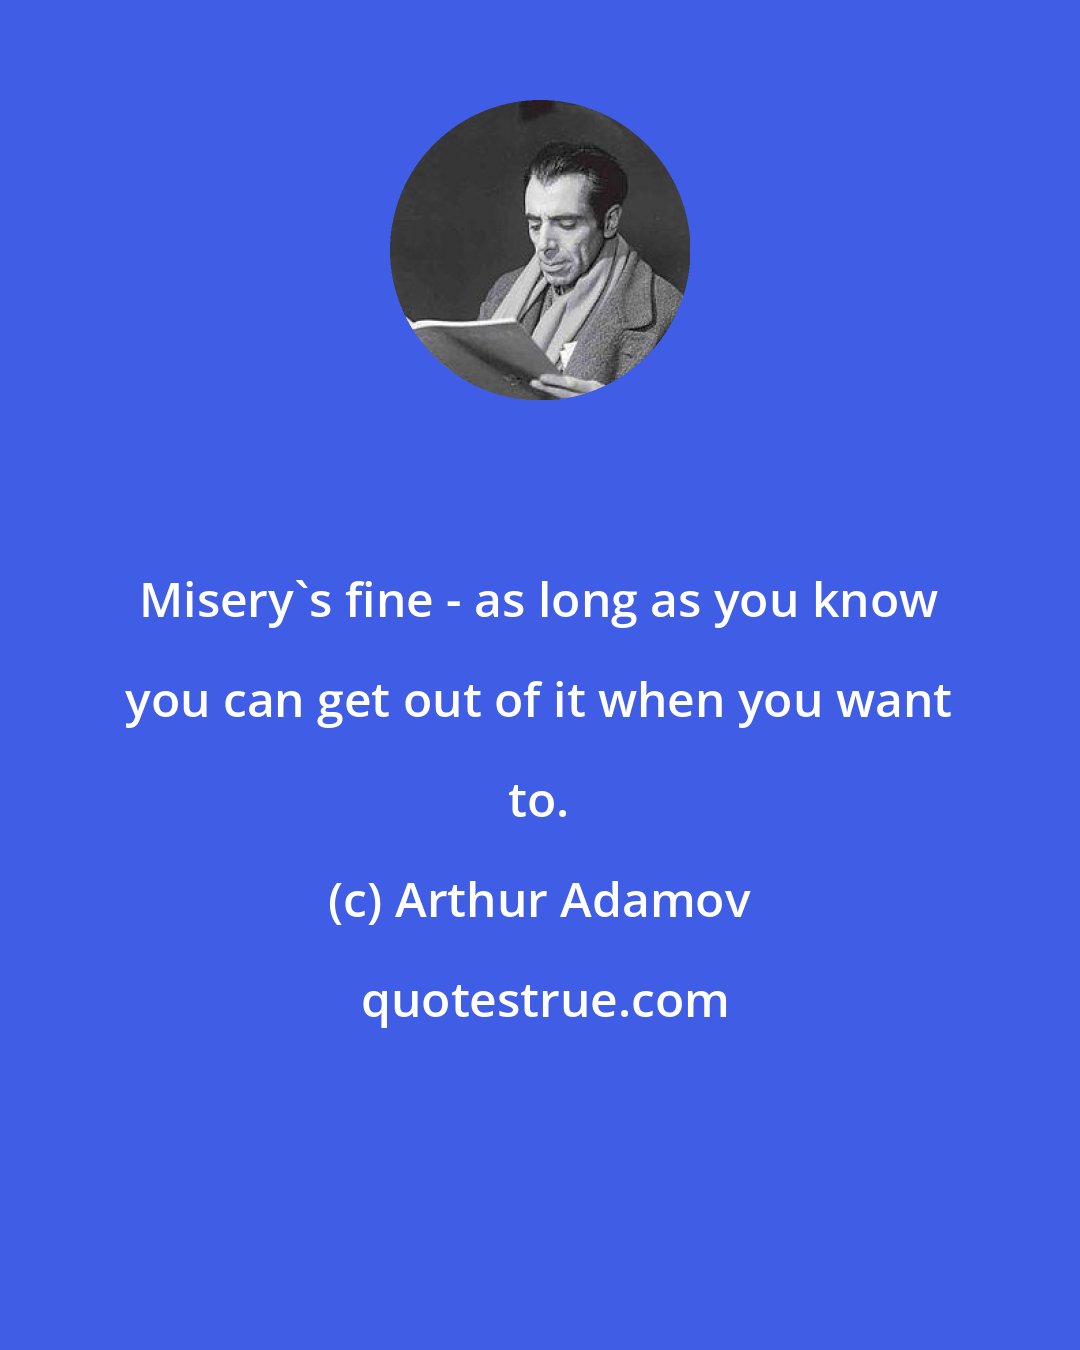 Arthur Adamov: Misery's fine - as long as you know you can get out of it when you want to.